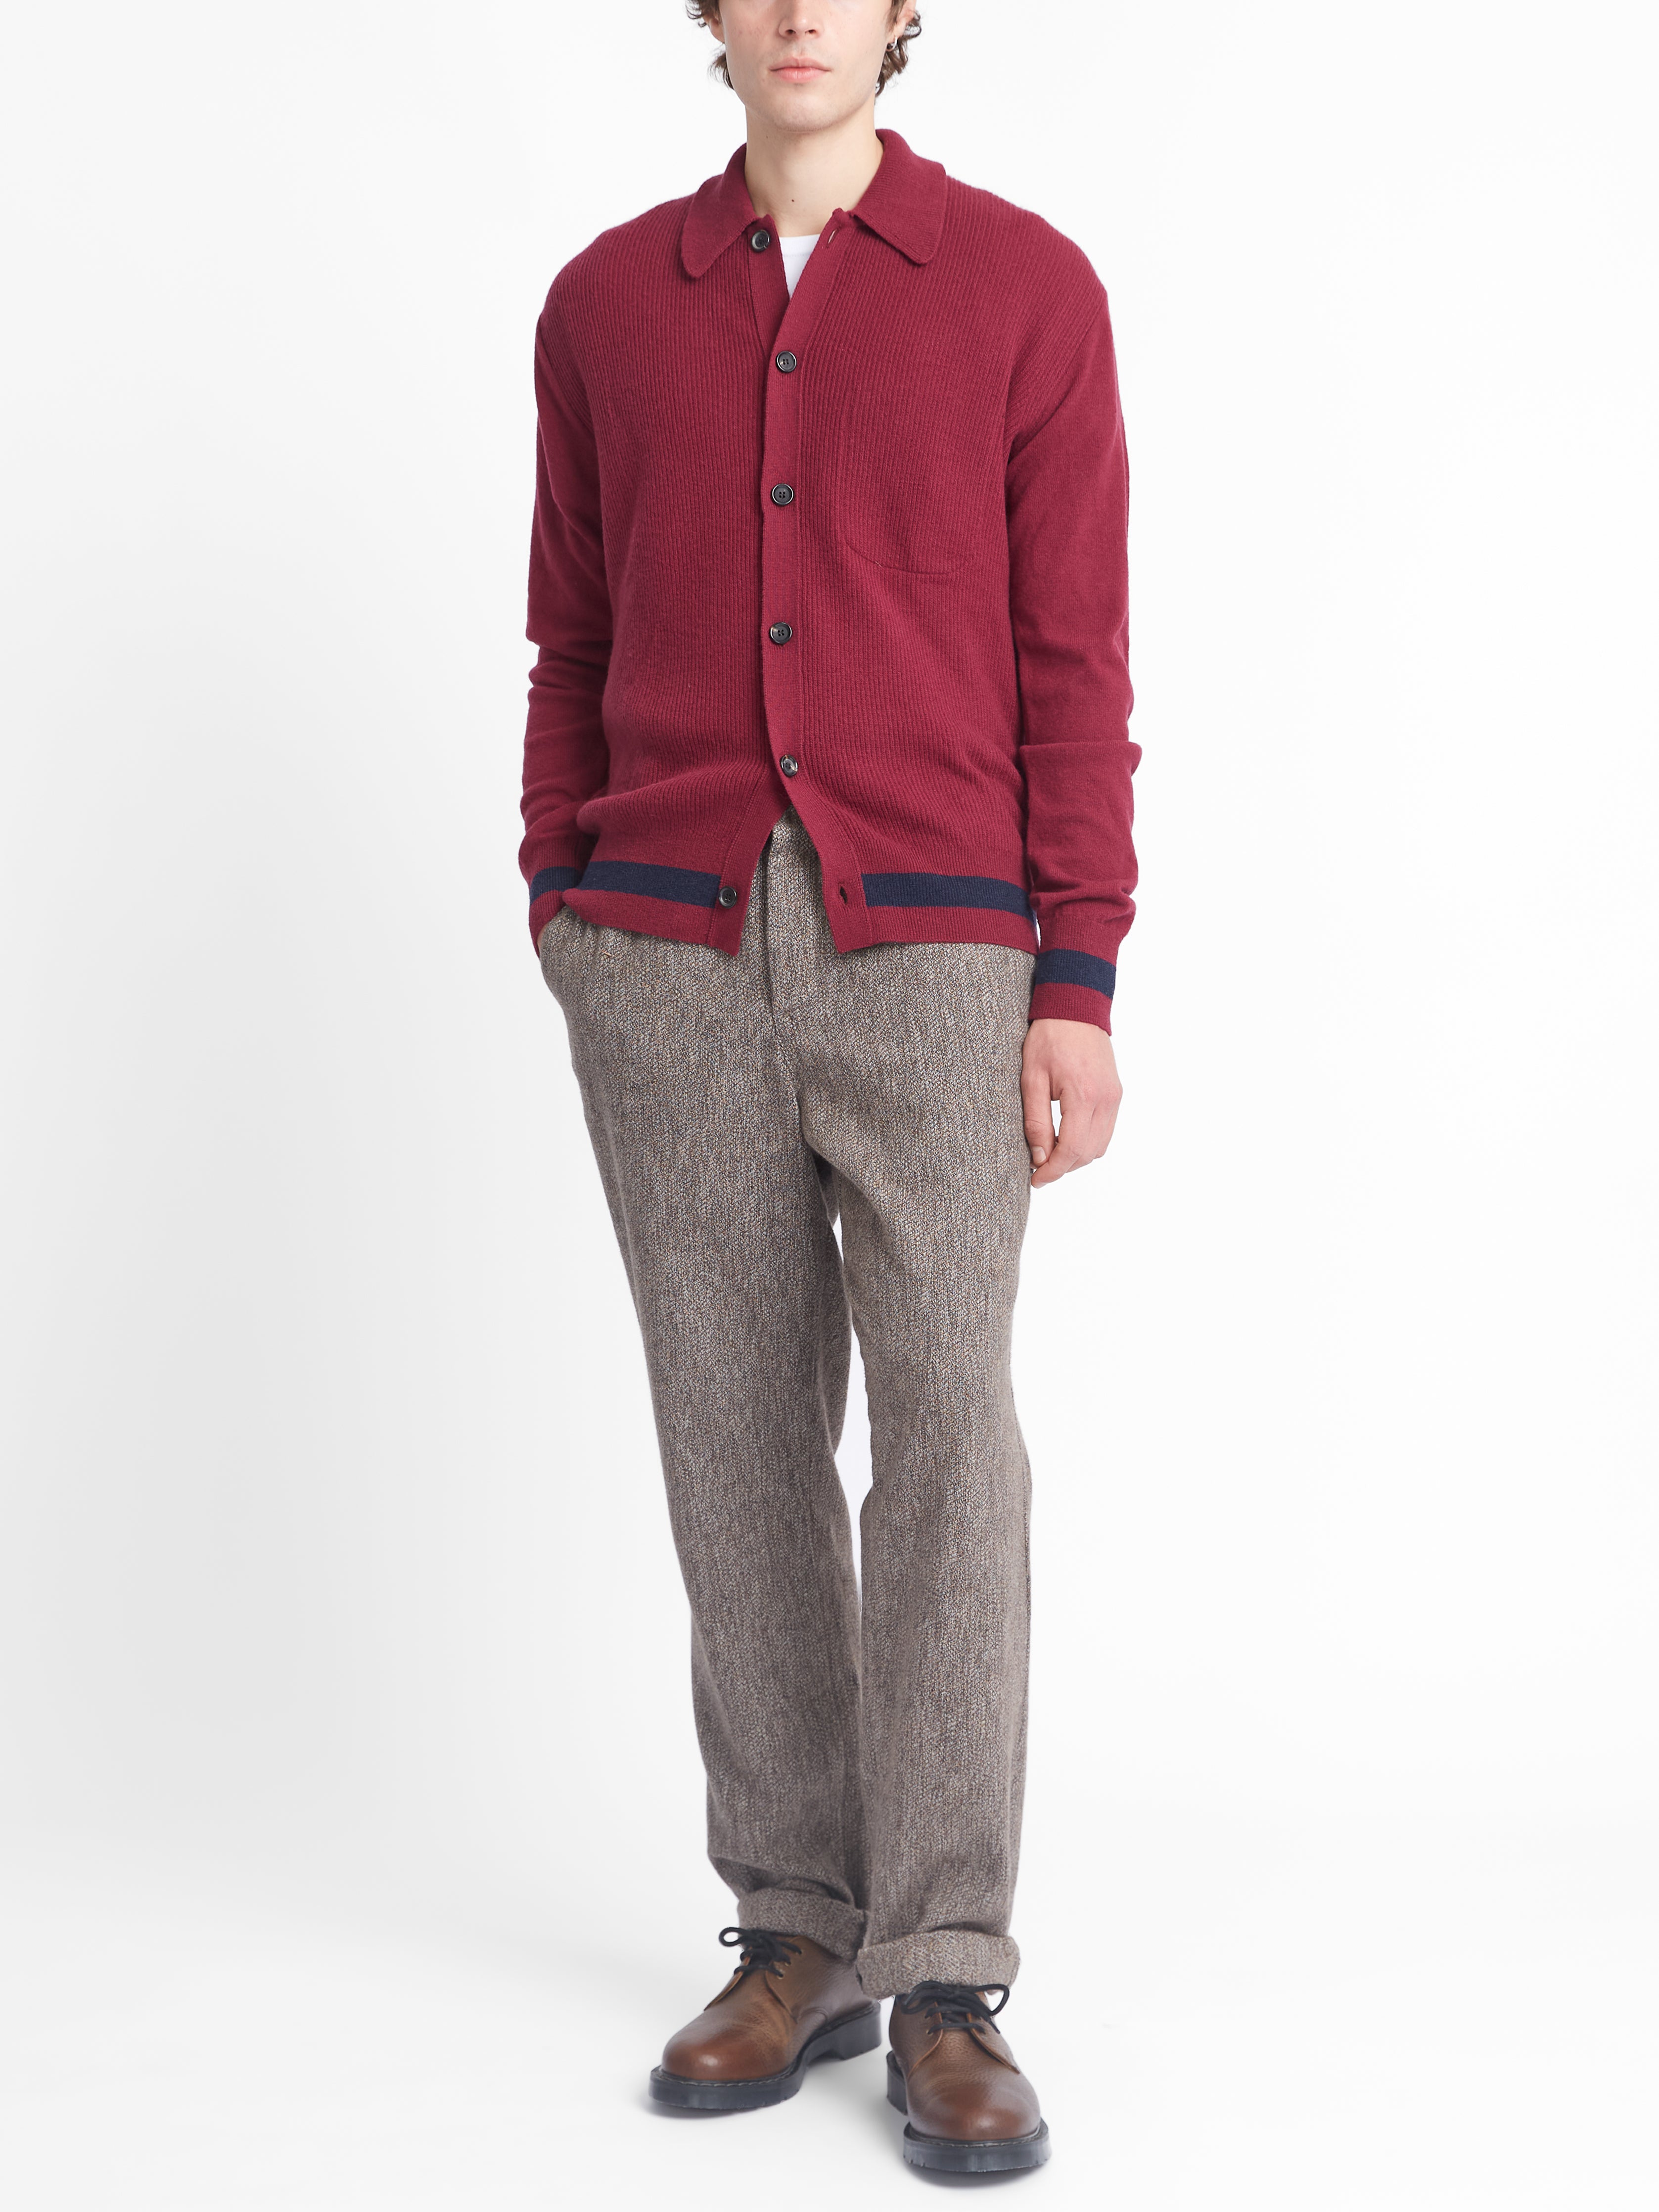 Britten Knitted Cardigan Greeves Berry Red